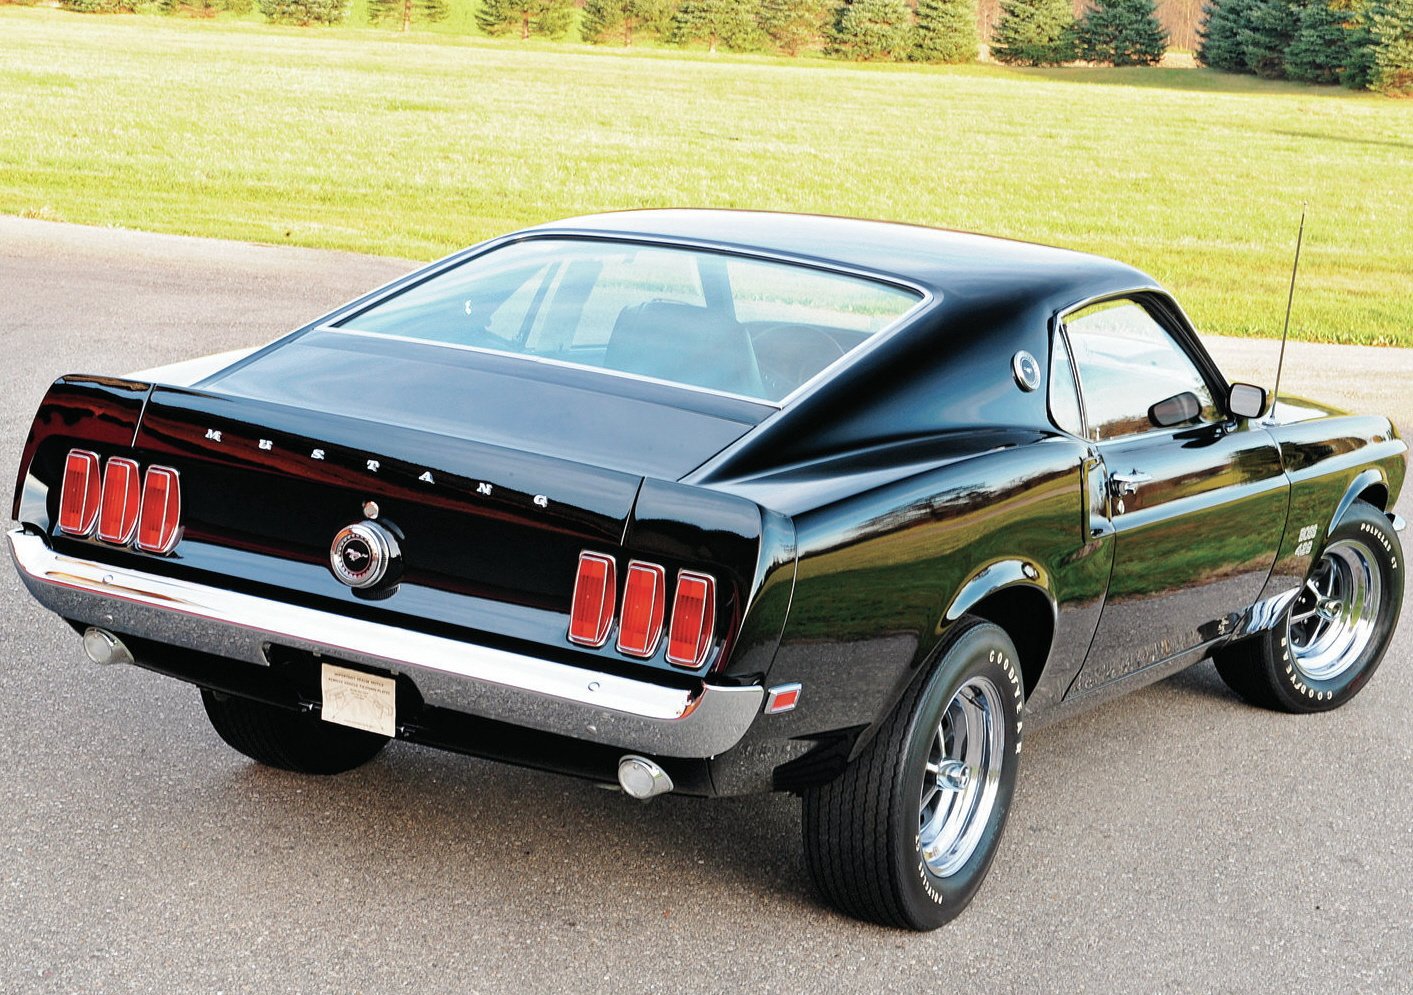  429 for sale wallpaper 429 Boss Mustang For Sale Viewing Gallery pict